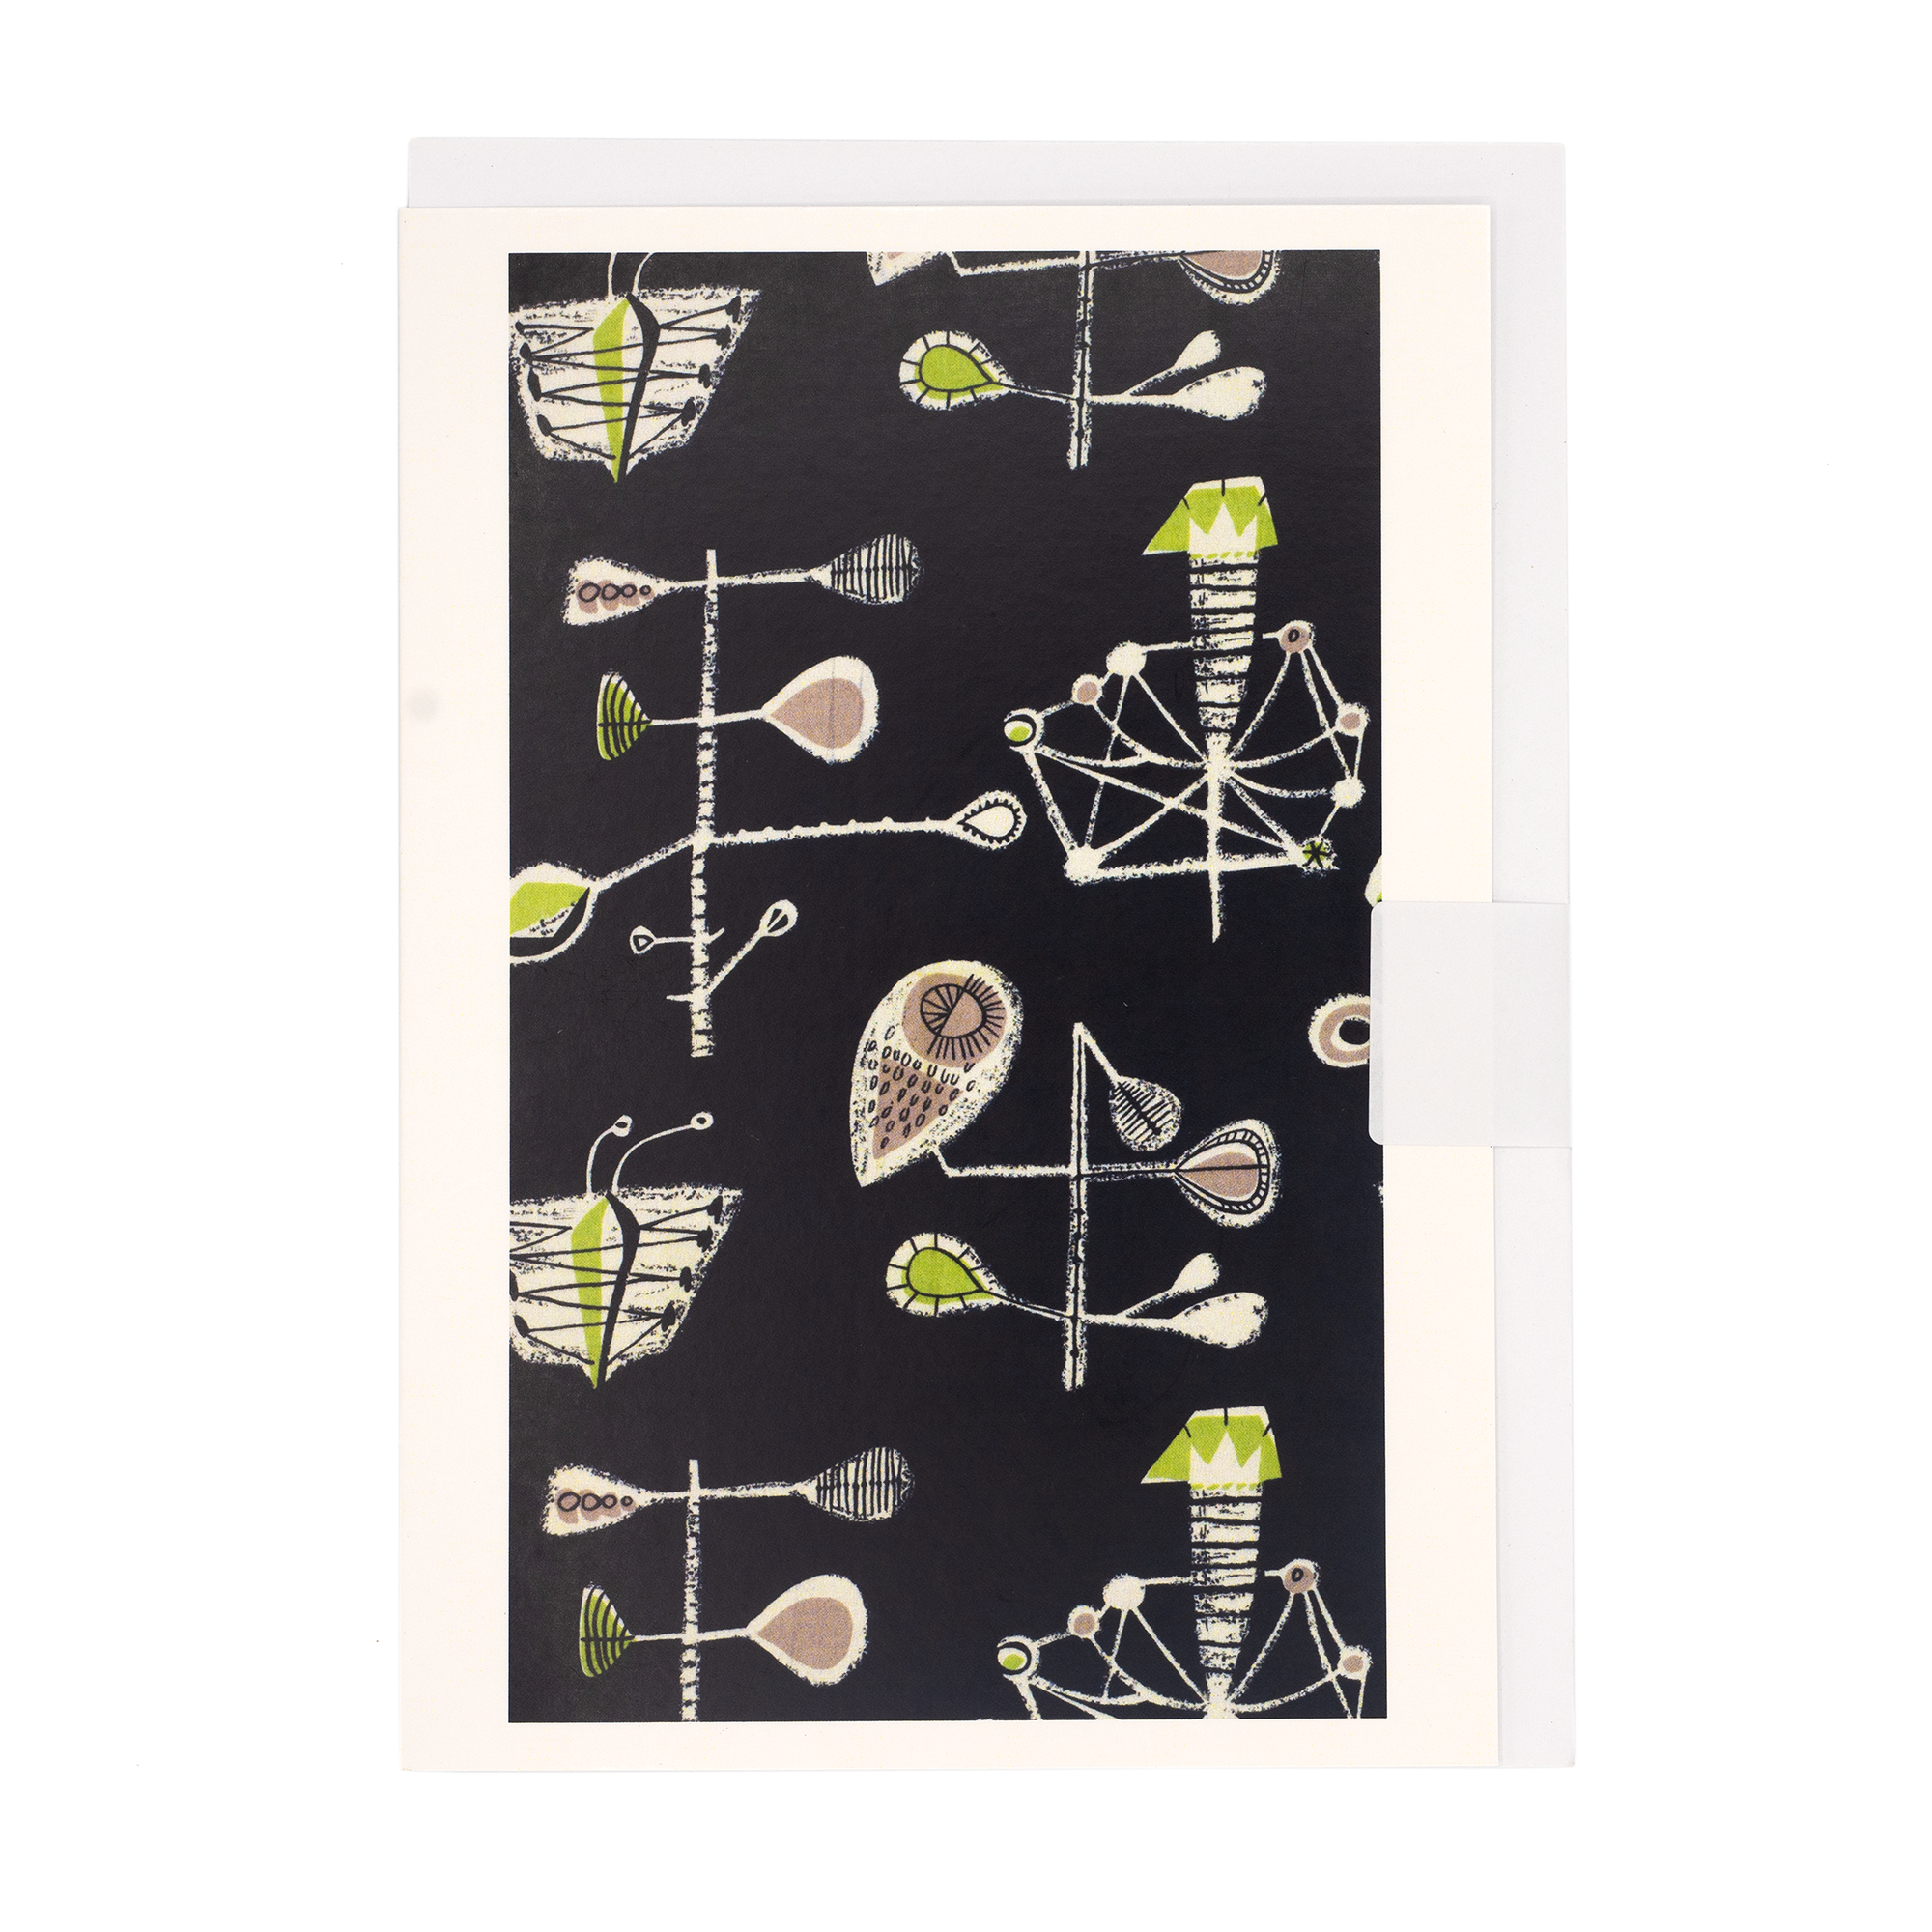 Image of greetings card with Lucienne Day Small Hours design. Black background with white, green and cream shapes